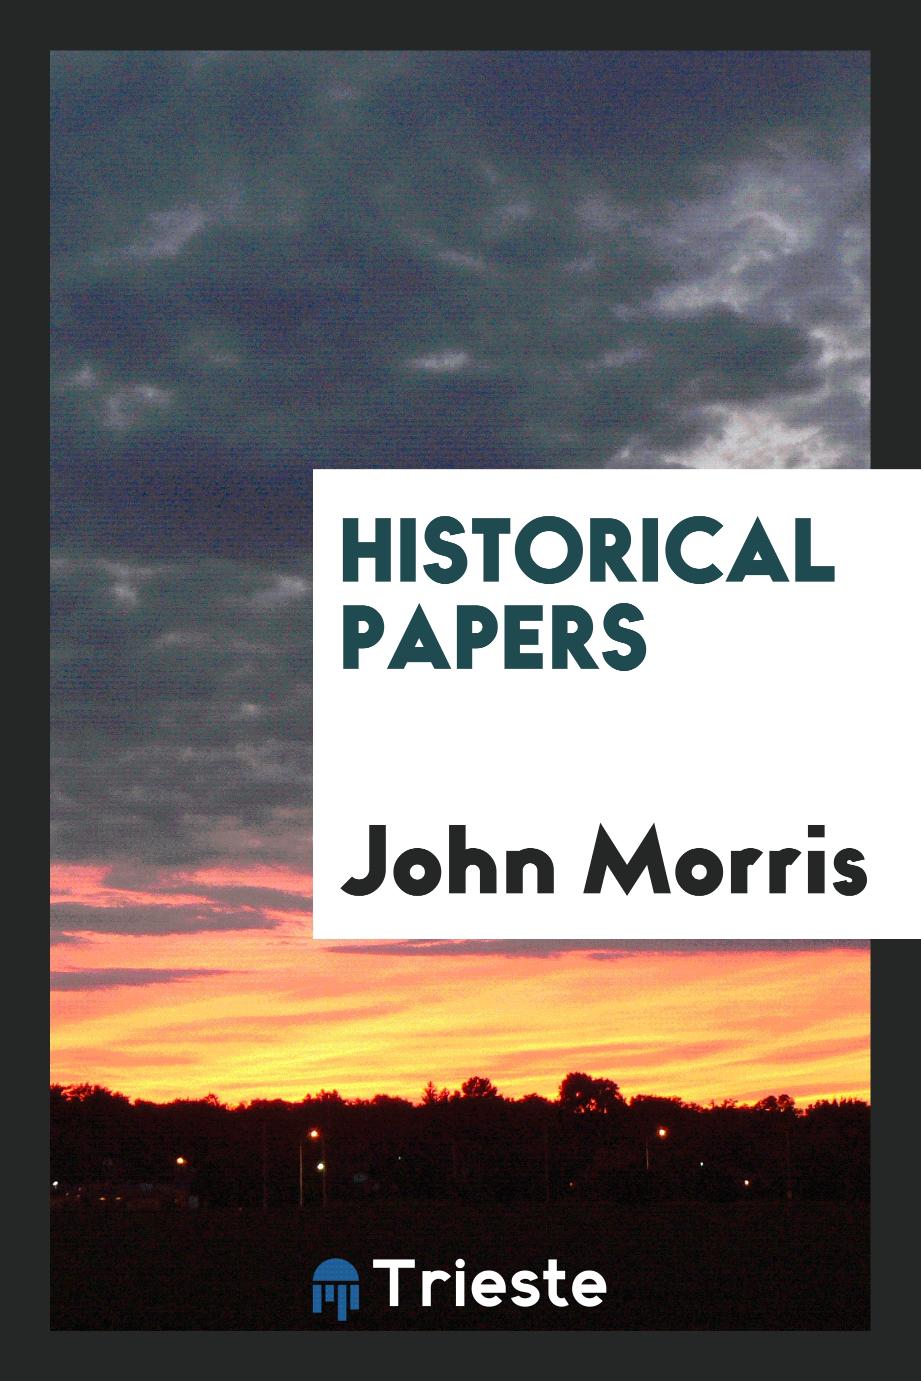 Historical papers